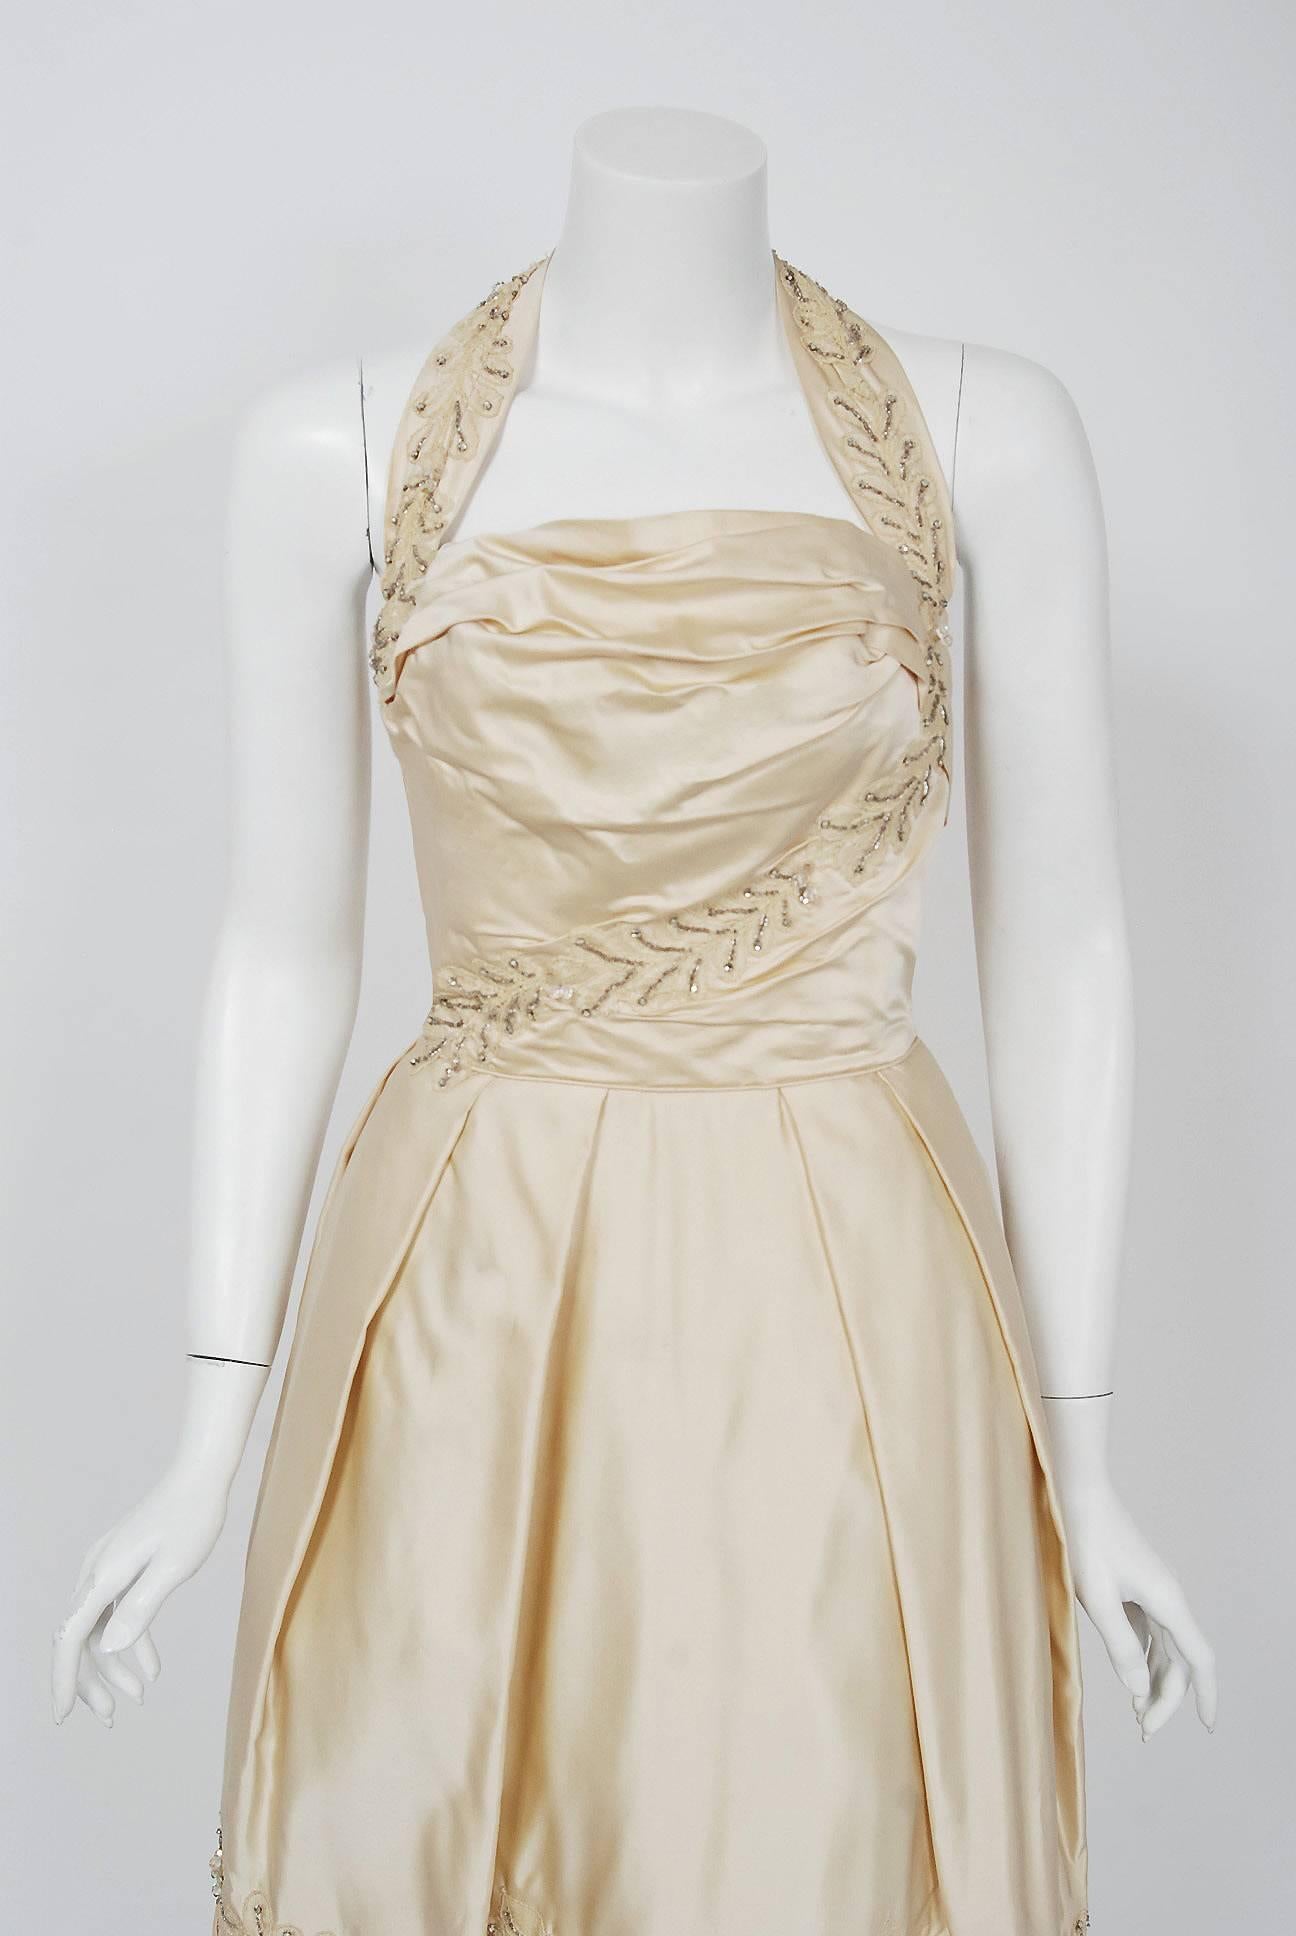 This is such a breathtaking and ethereal couture party dress from the iconic Ceil Chapman designer label. Perfect for any upcoming wedding; you can't help but feel feminine in this beauty. The garment is fashioned from stunning mid-weight ivory silk